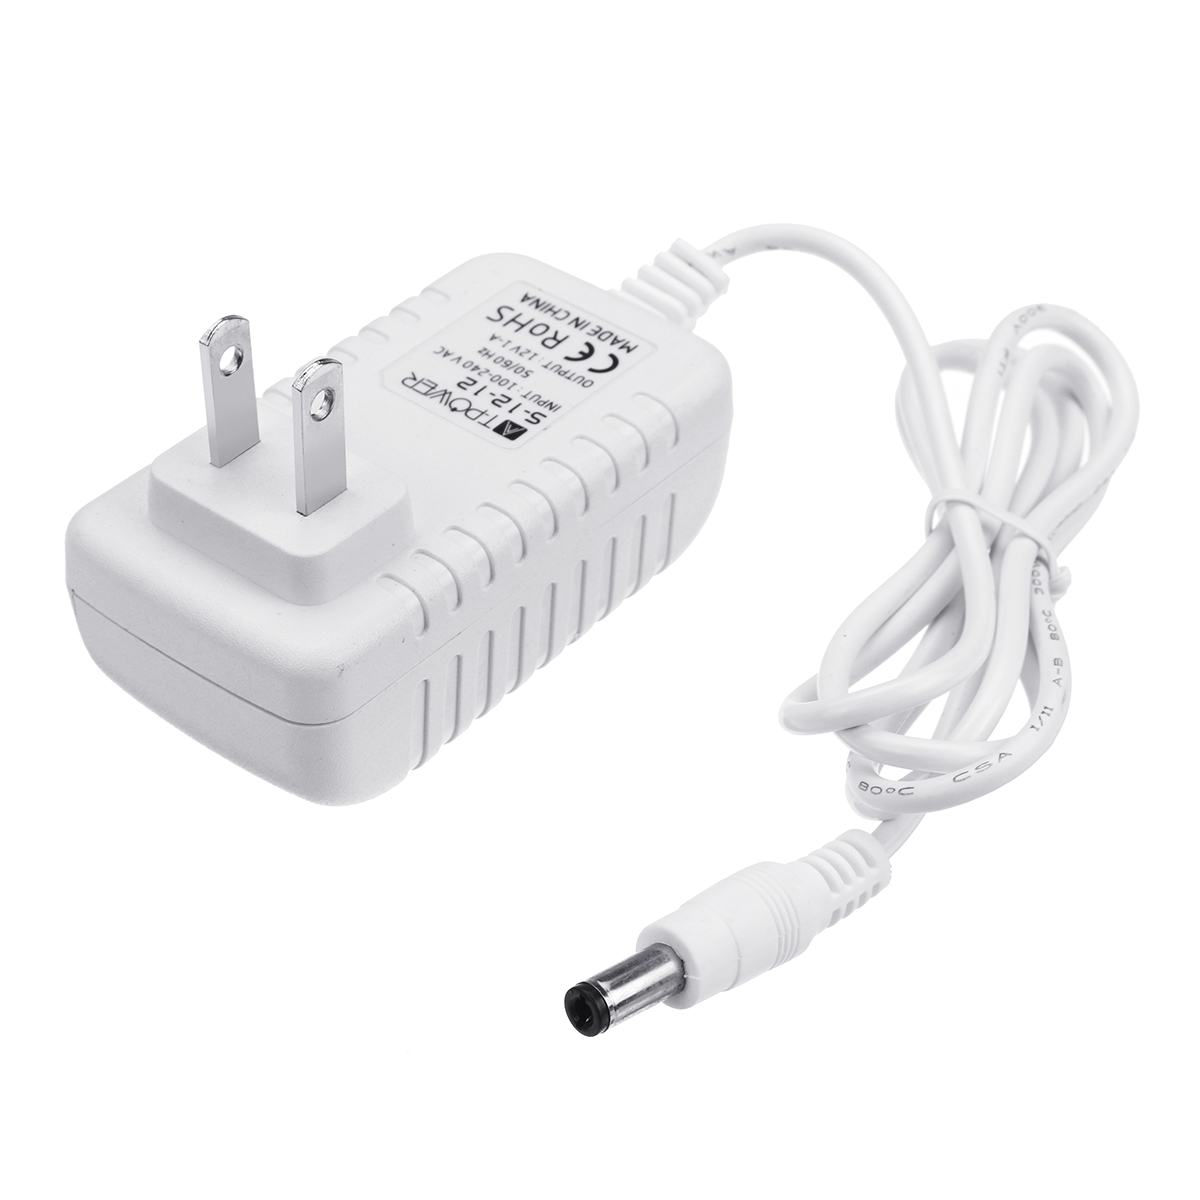 Individuals-are-not-sold-separately-Connector-with-rgb-lamp-JST-Plug-Dc12v-car-charger-EUUS-UK-Plug-1631414-2